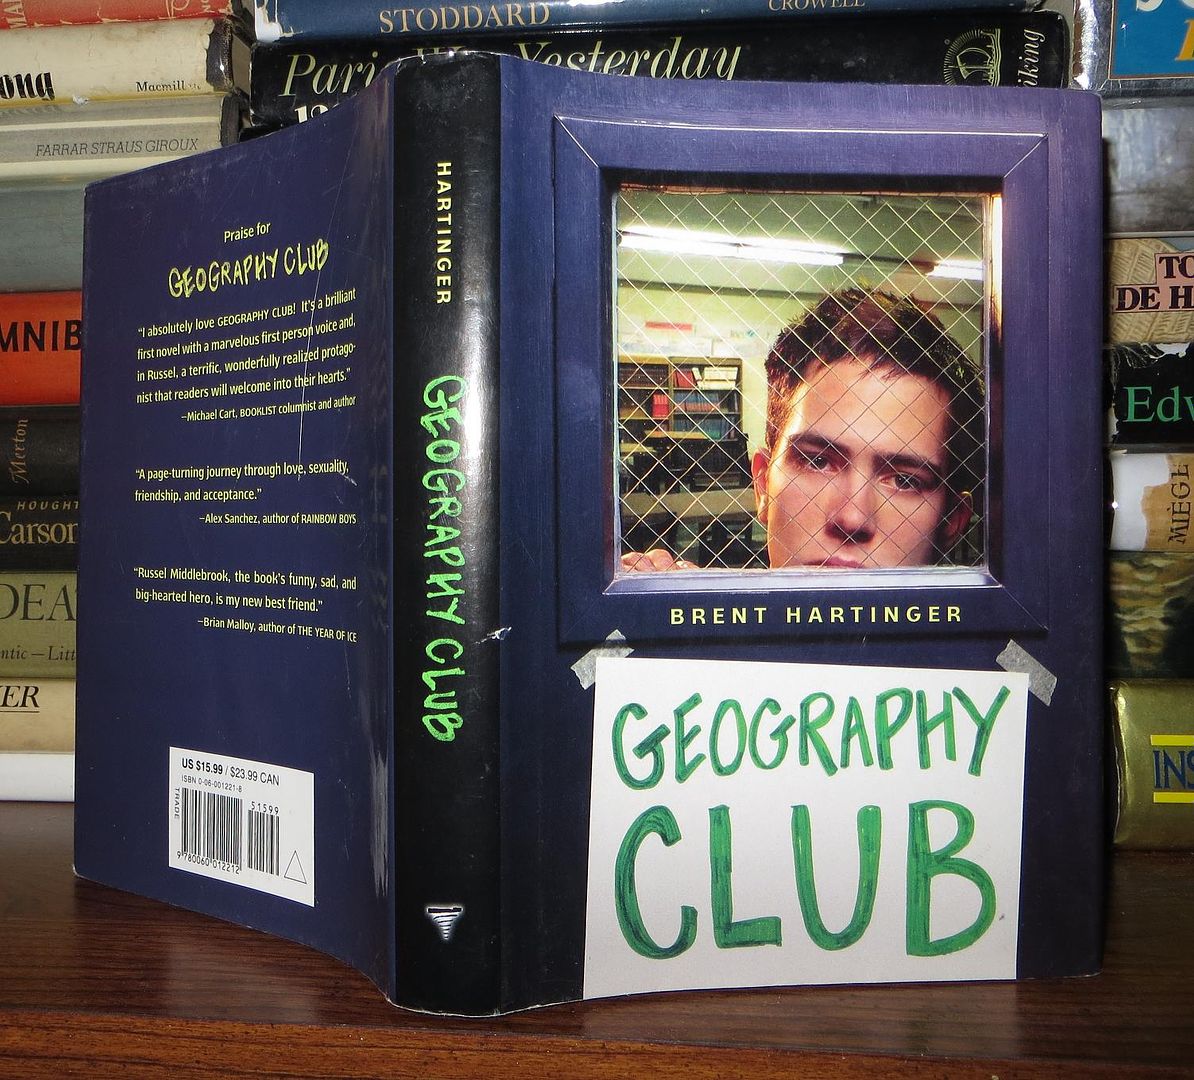 HARTINGER, BRENT - Geography Club